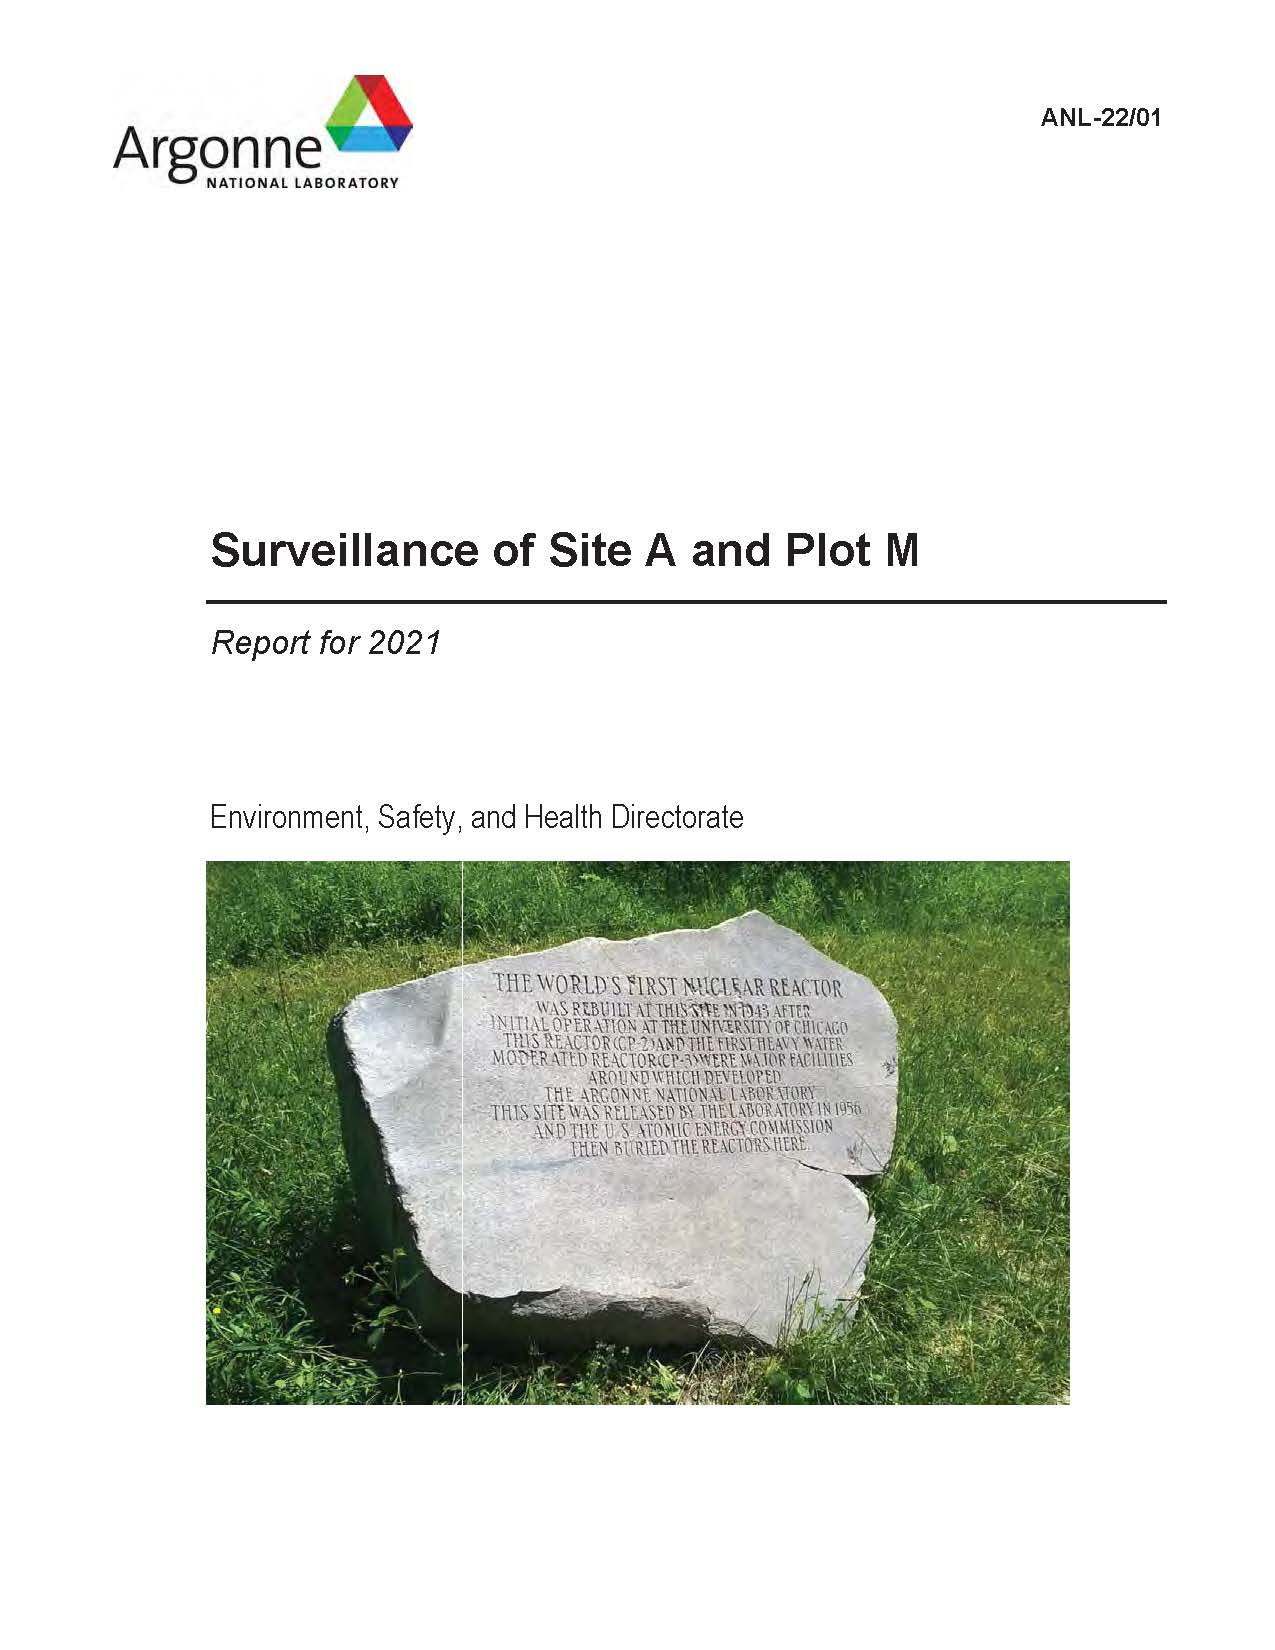 Cover of 2021 Surveillance of Site A and Plot M report.